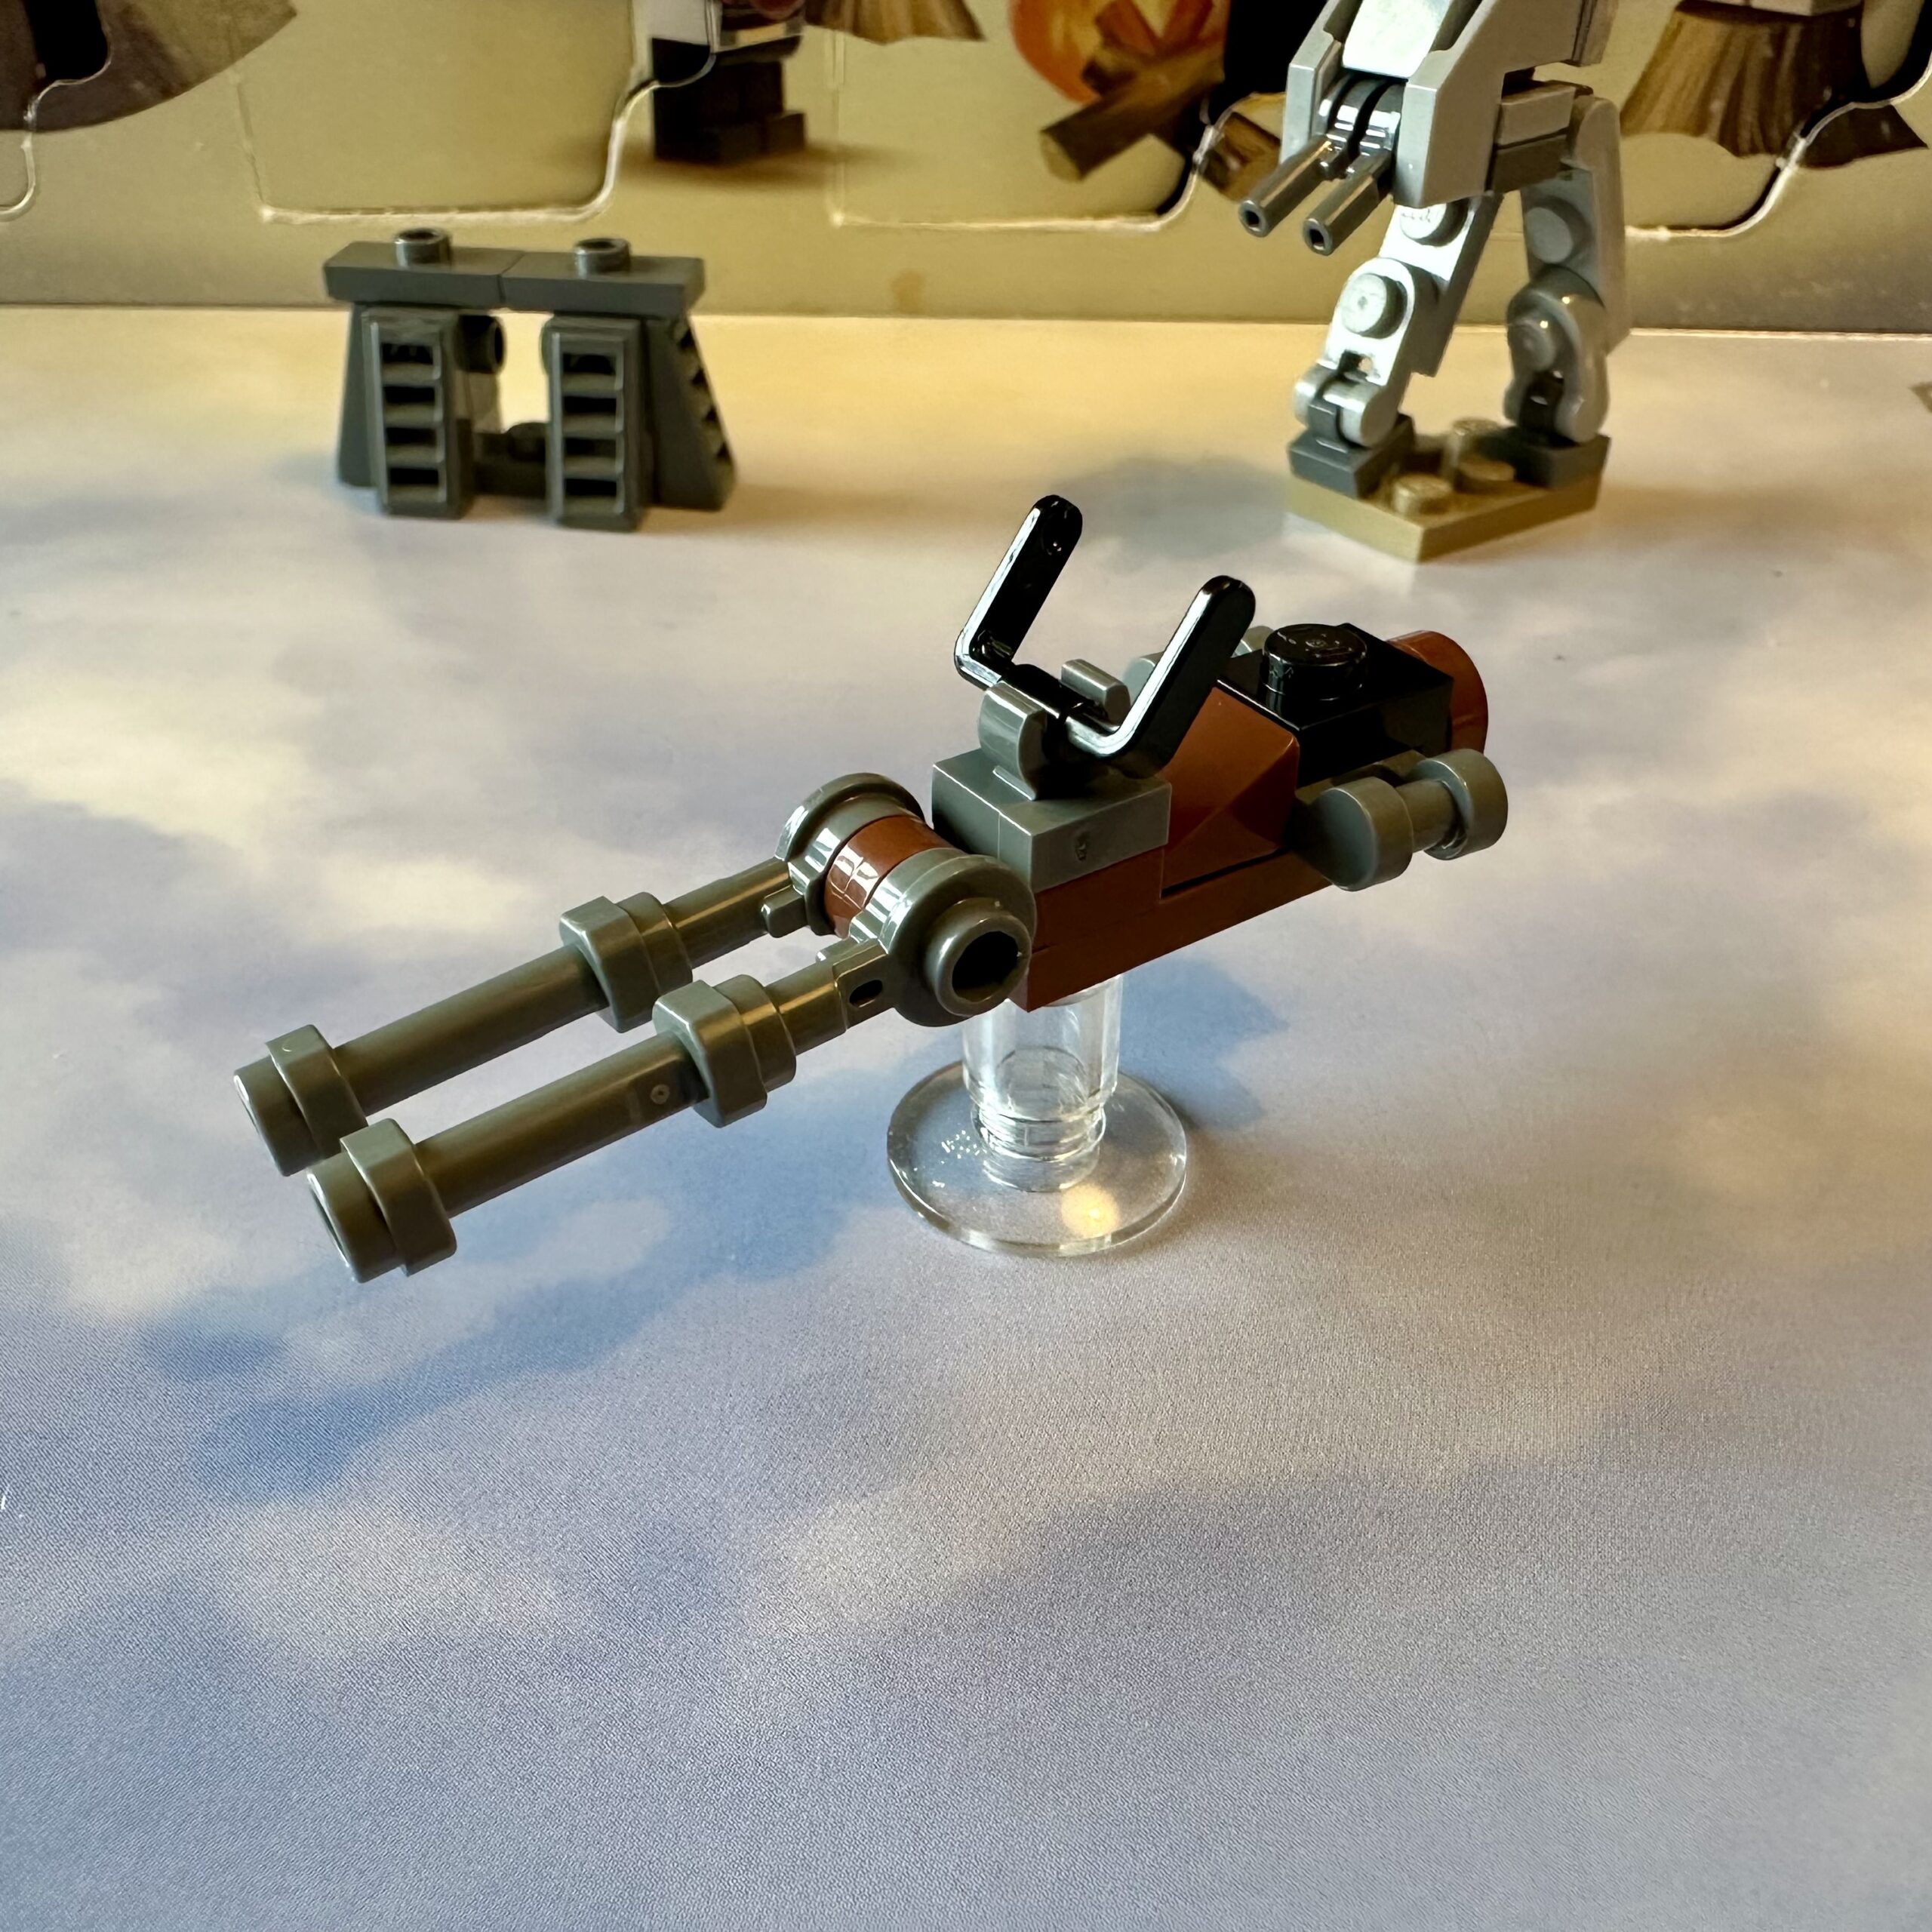 LEGO micro-build of an Imperial Speeder Bike mostly done in brown and dark gray. The 2023 version is longer and sleeker than the others but lacks the front steering vanes.